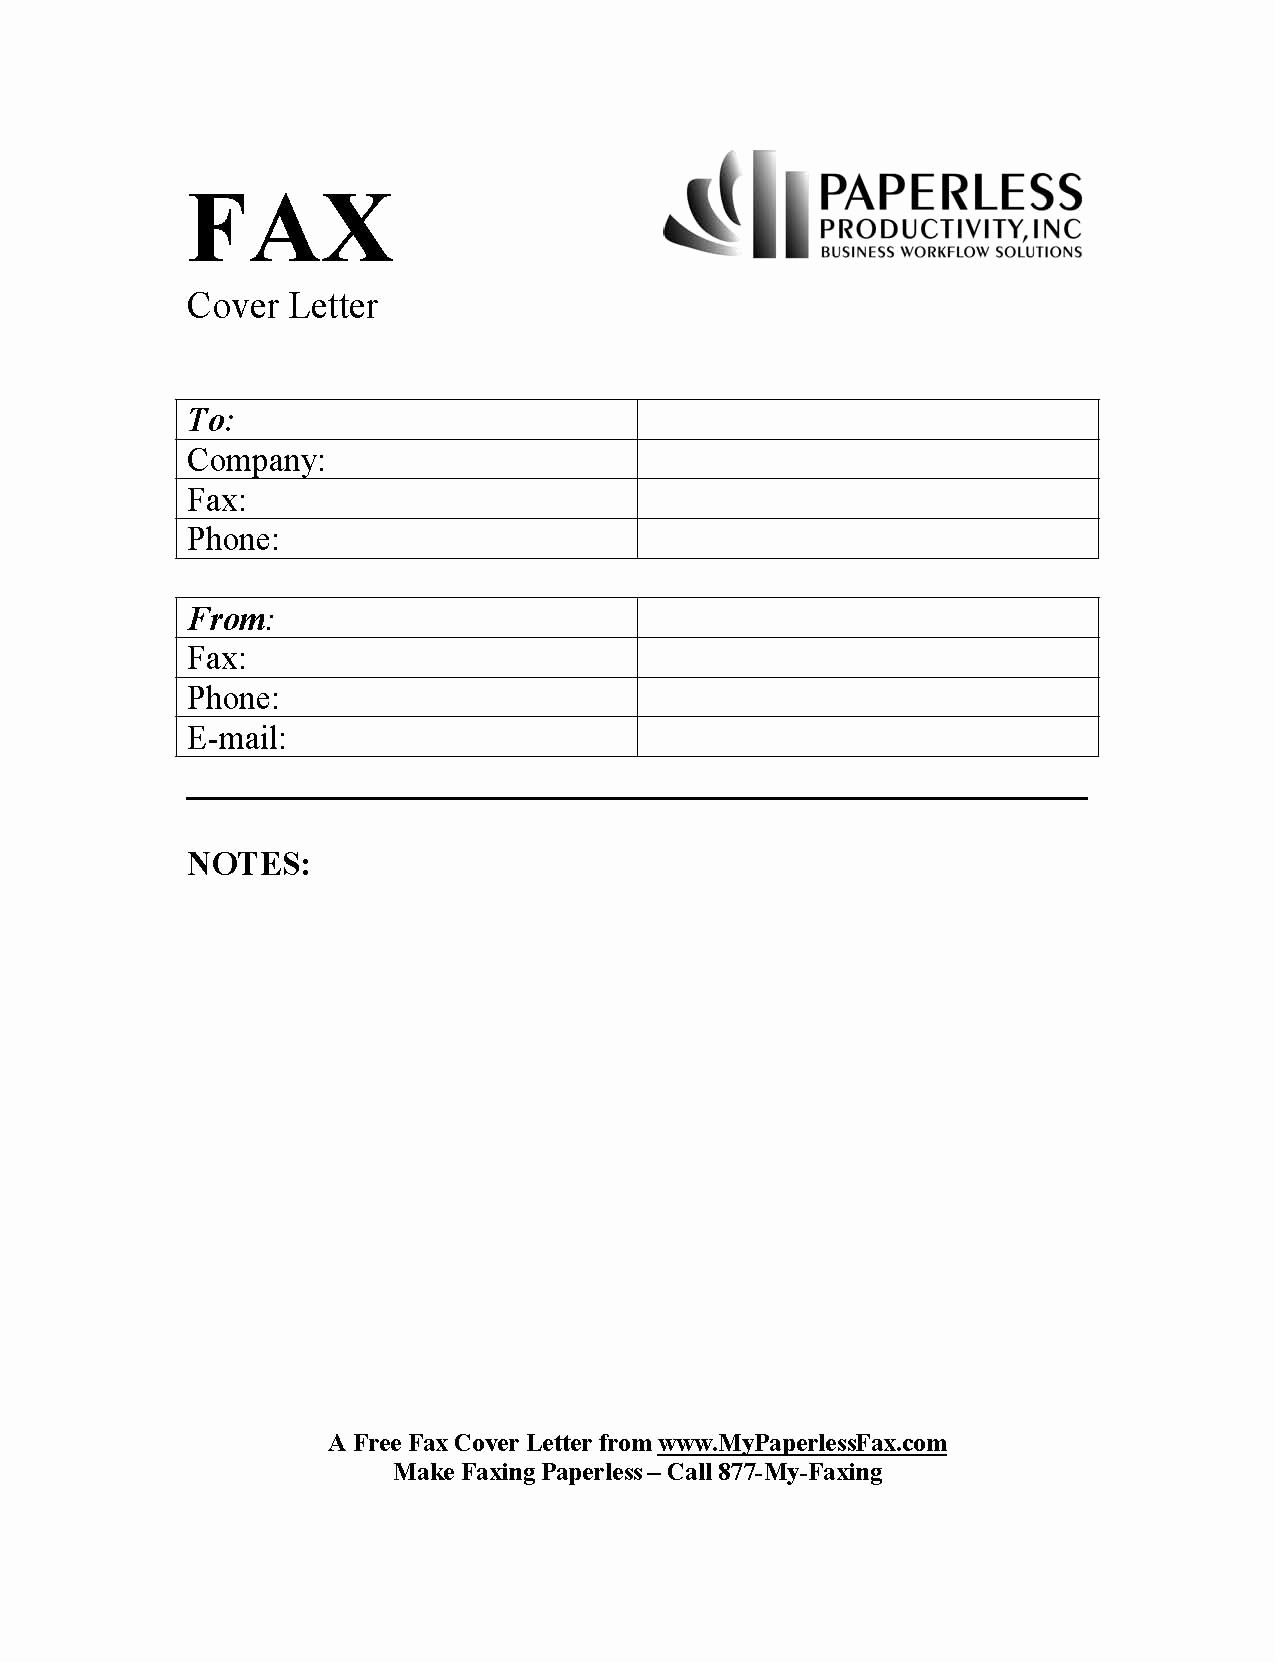 Sample Of Fax Cover Letter Elegant Microsoft Fice Fax Cover Sheet Template